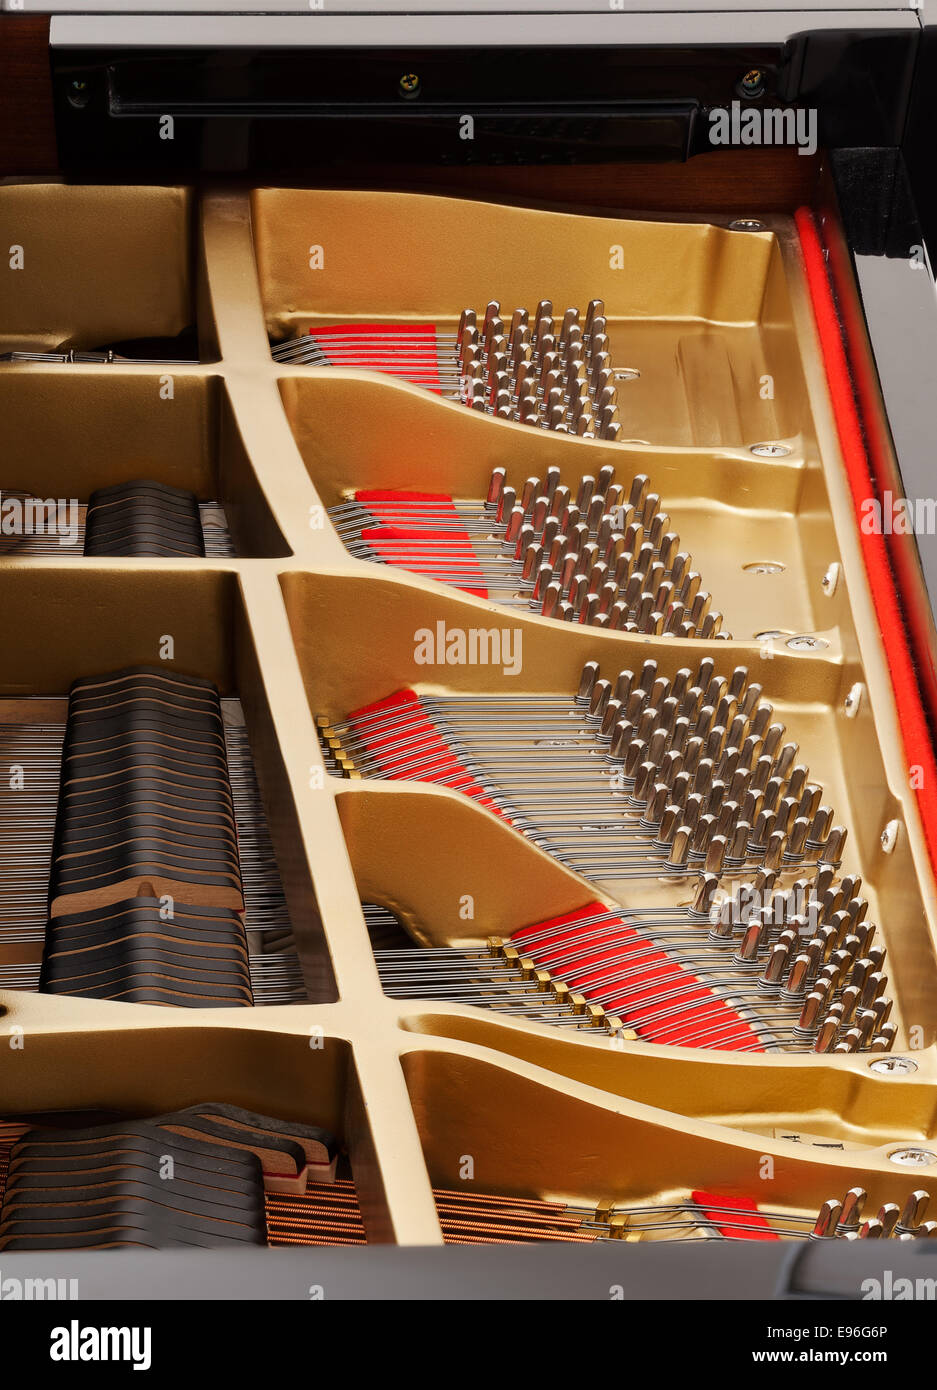 Interior of grand piano with strings Stock Photo